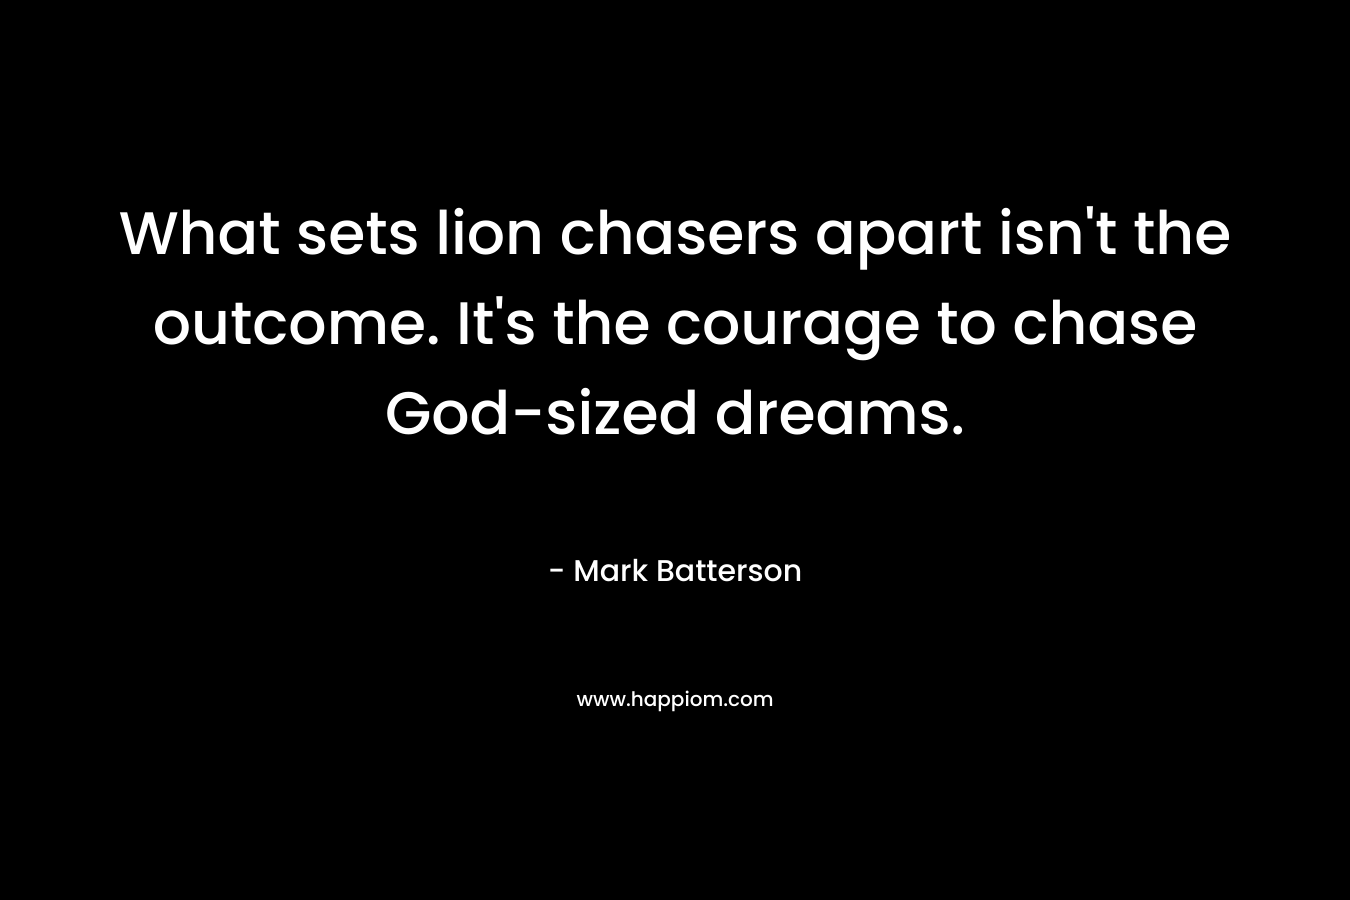 What sets lion chasers apart isn’t the outcome. It’s the courage to chase God-sized dreams. – Mark Batterson